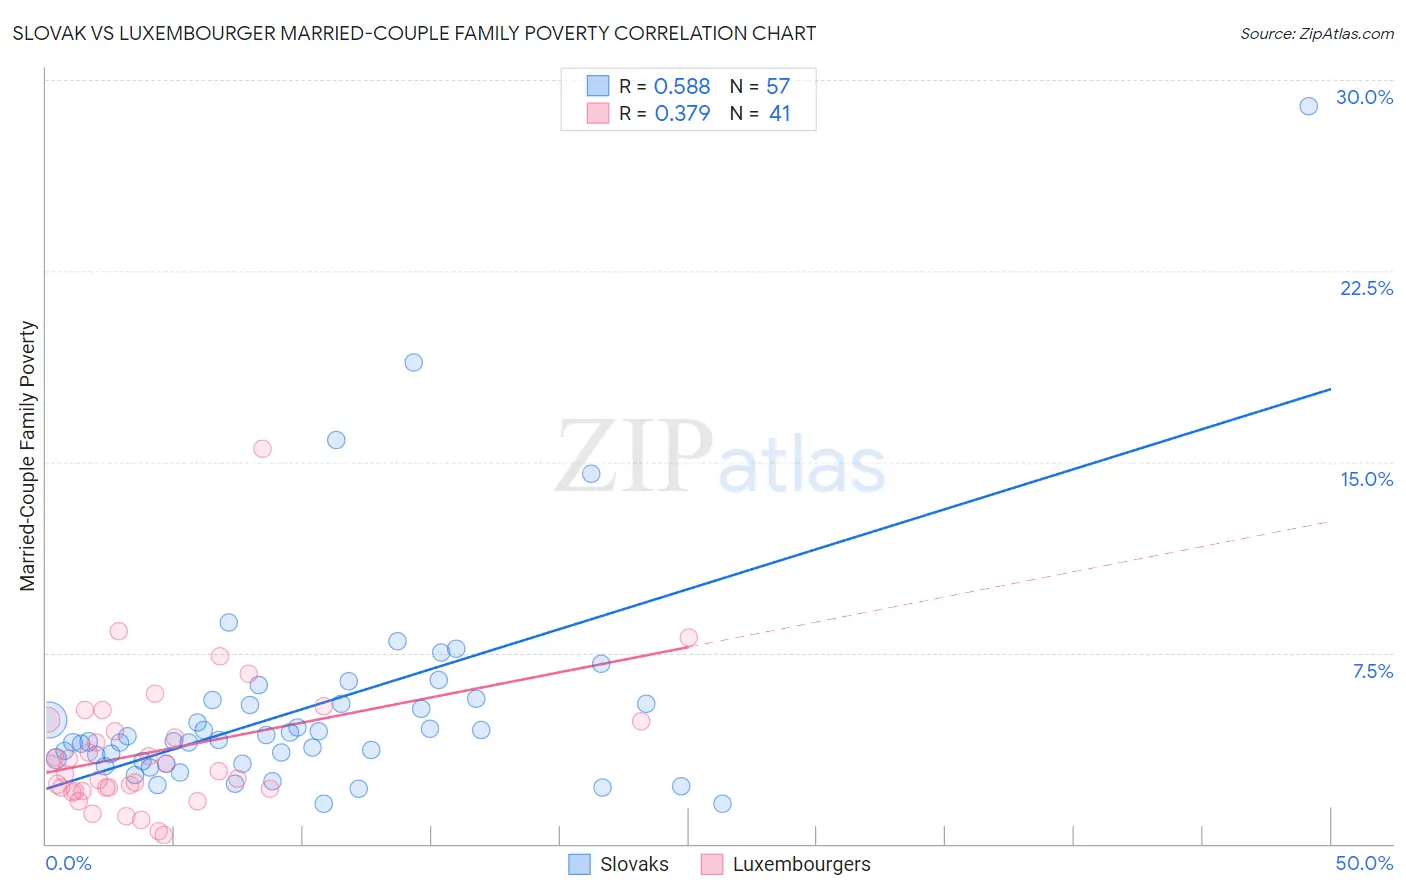 Slovak vs Luxembourger Married-Couple Family Poverty